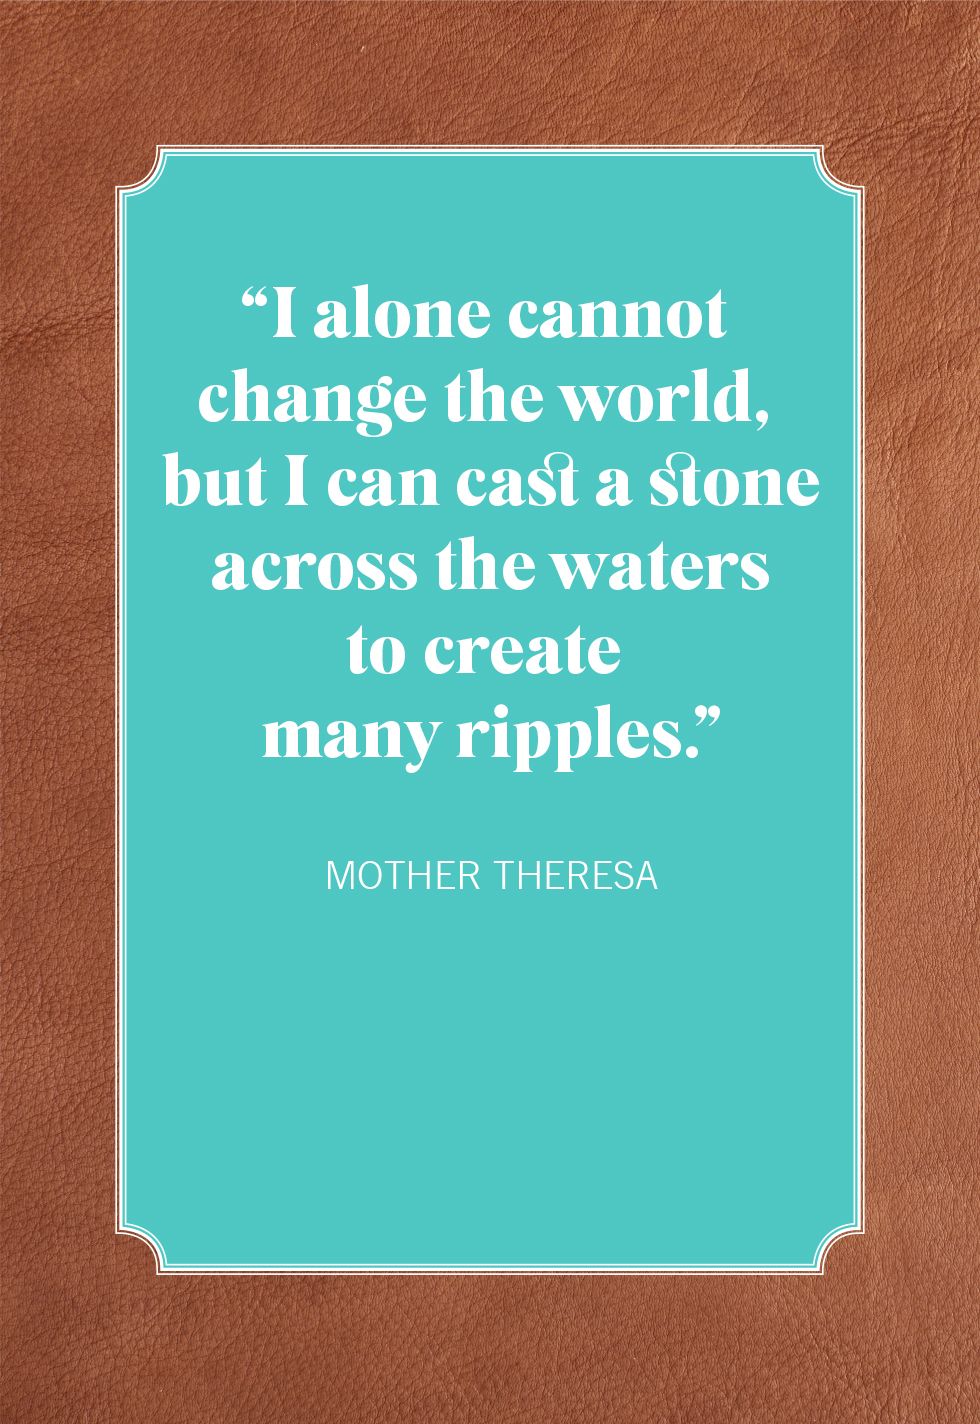 mother theresa quotes about change